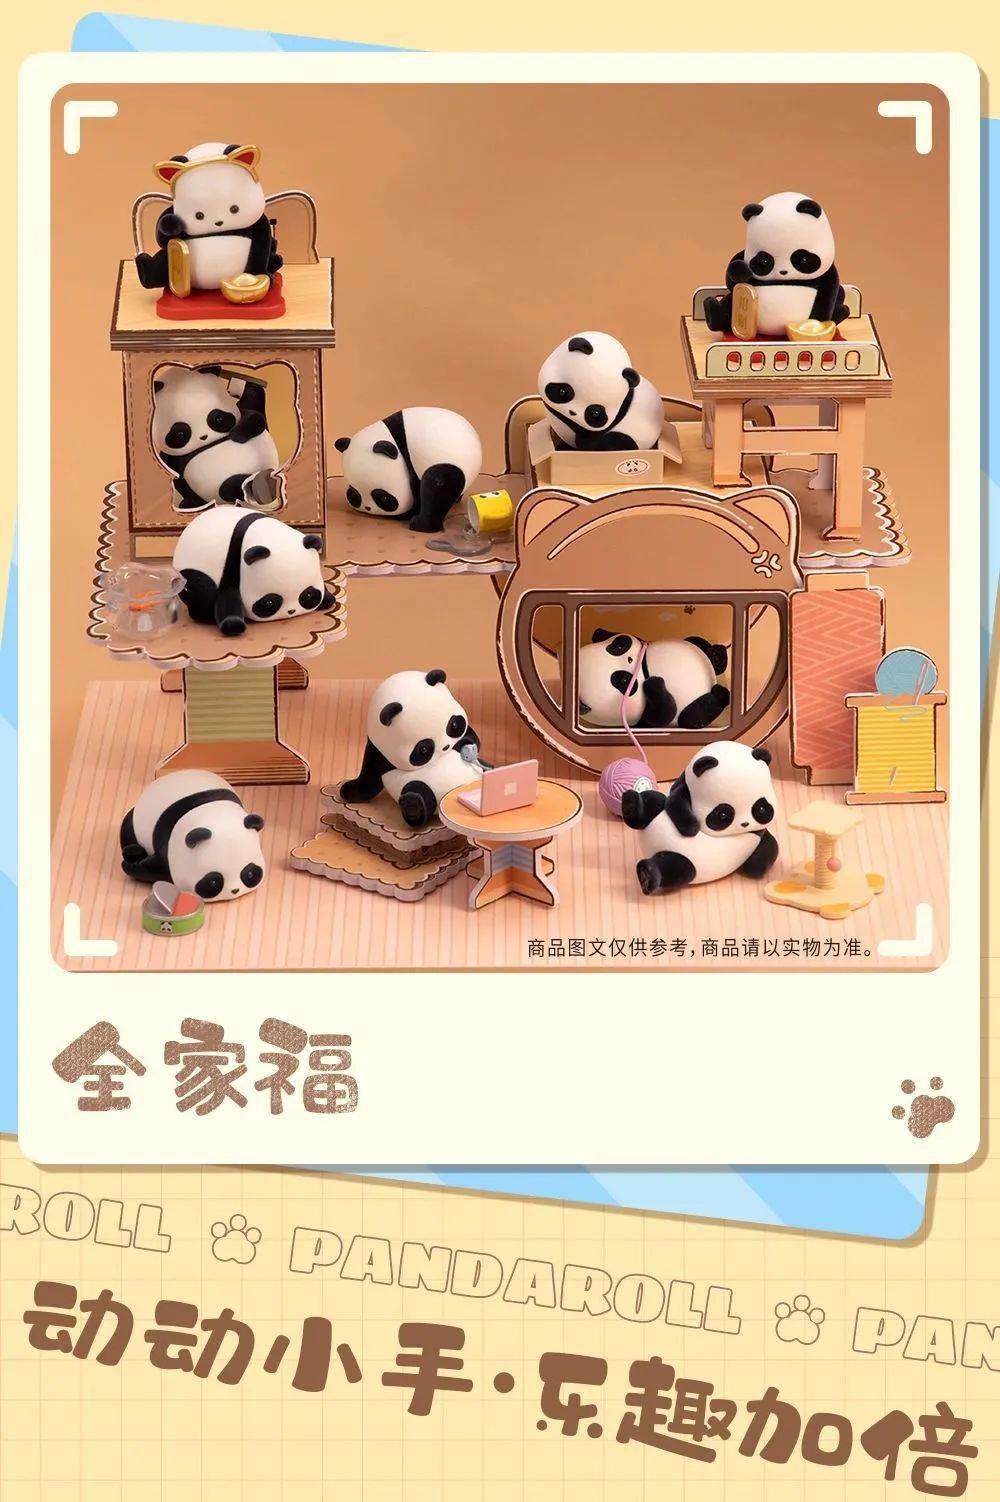 [52TOYS] PANDA ROLL - Pandas Are Also Cats